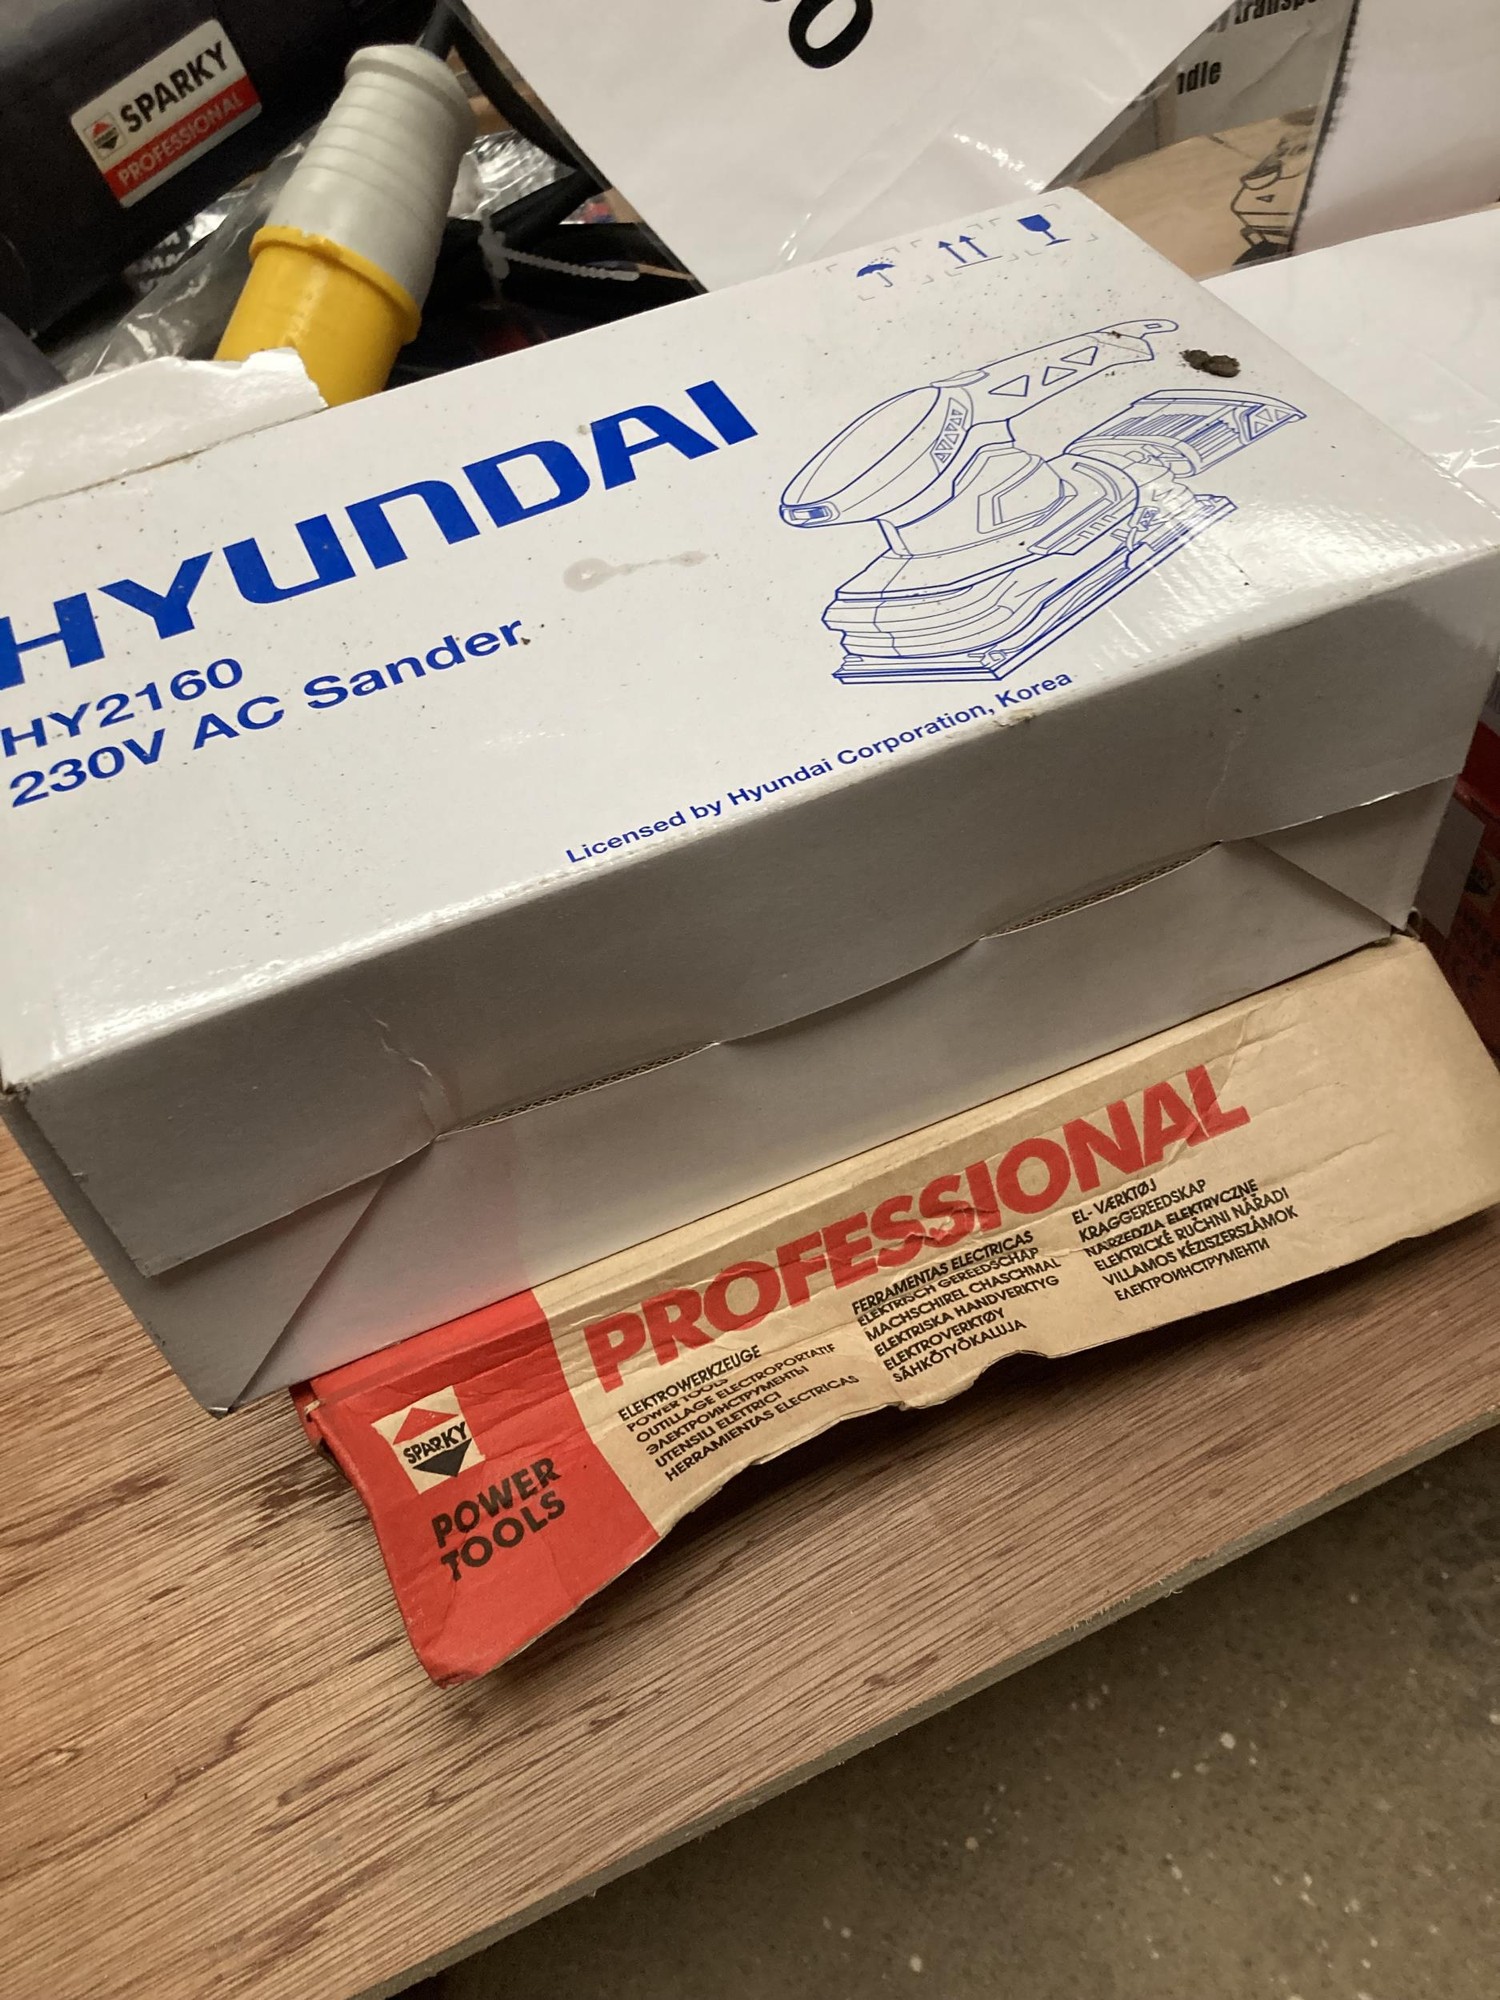 Sparky Professional drill and Hyundai sander